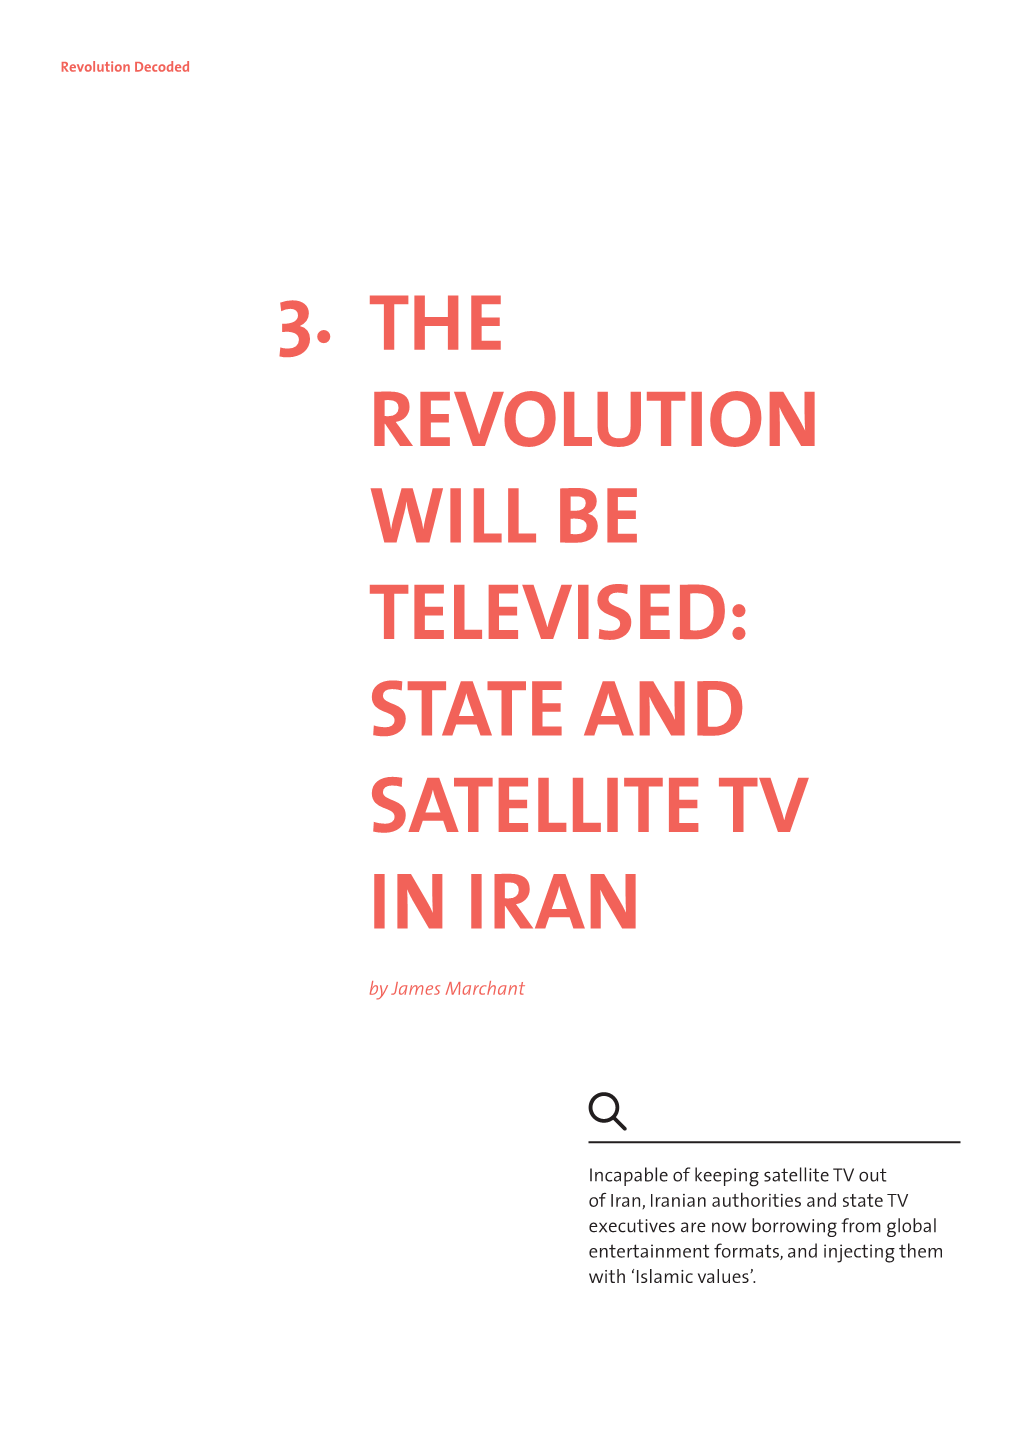 The Revolution Will Be Televised: State and Satellite Tv in Iran